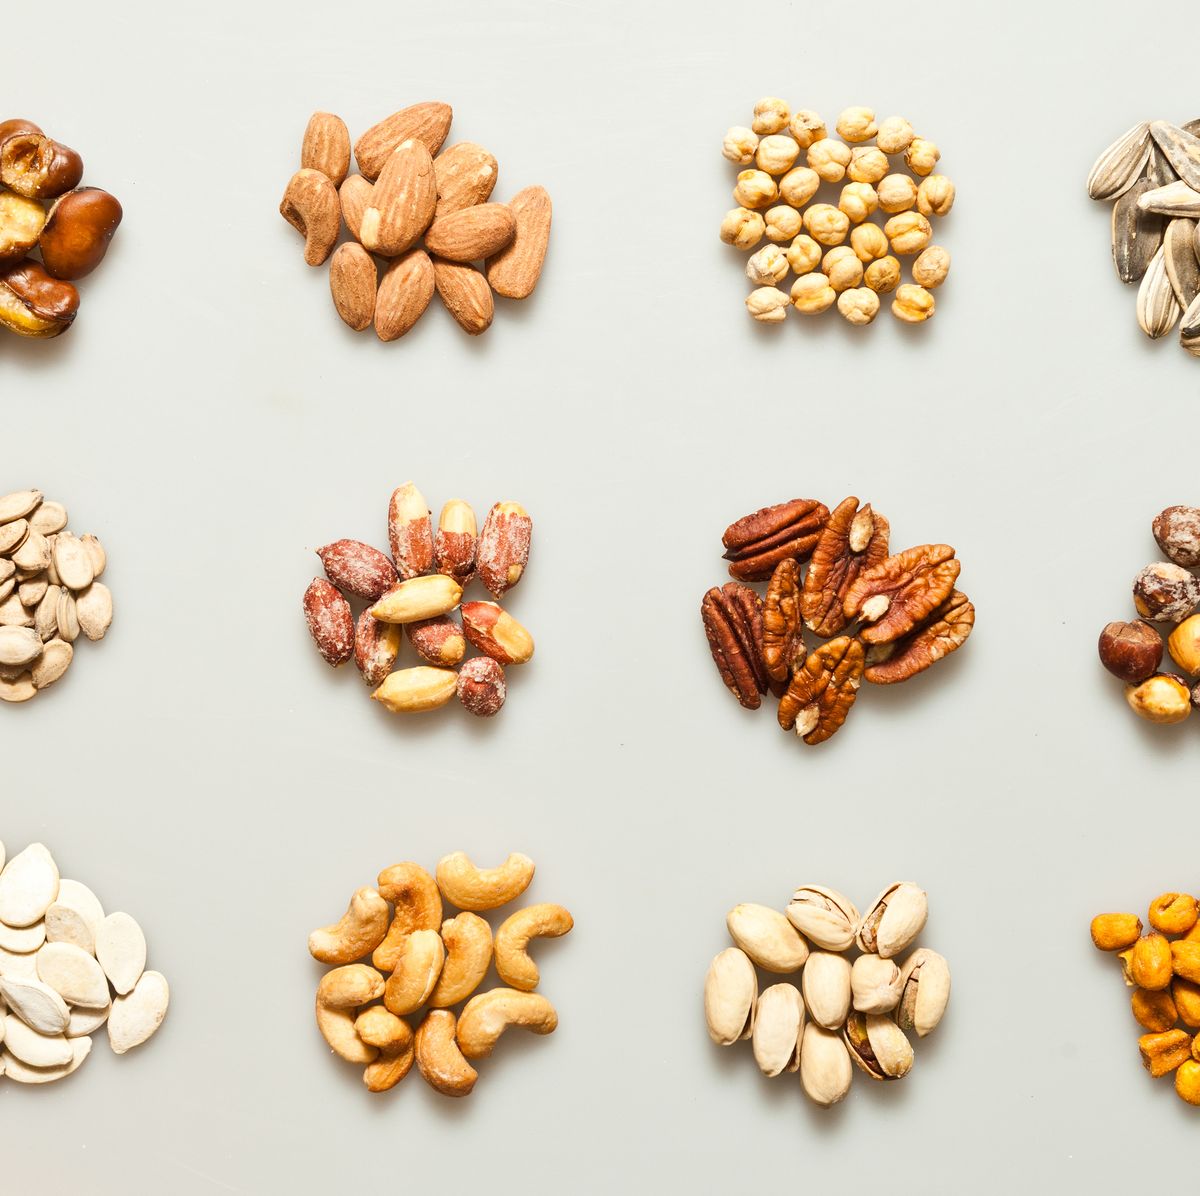 Healthiest Nuts to Add to Your Diet